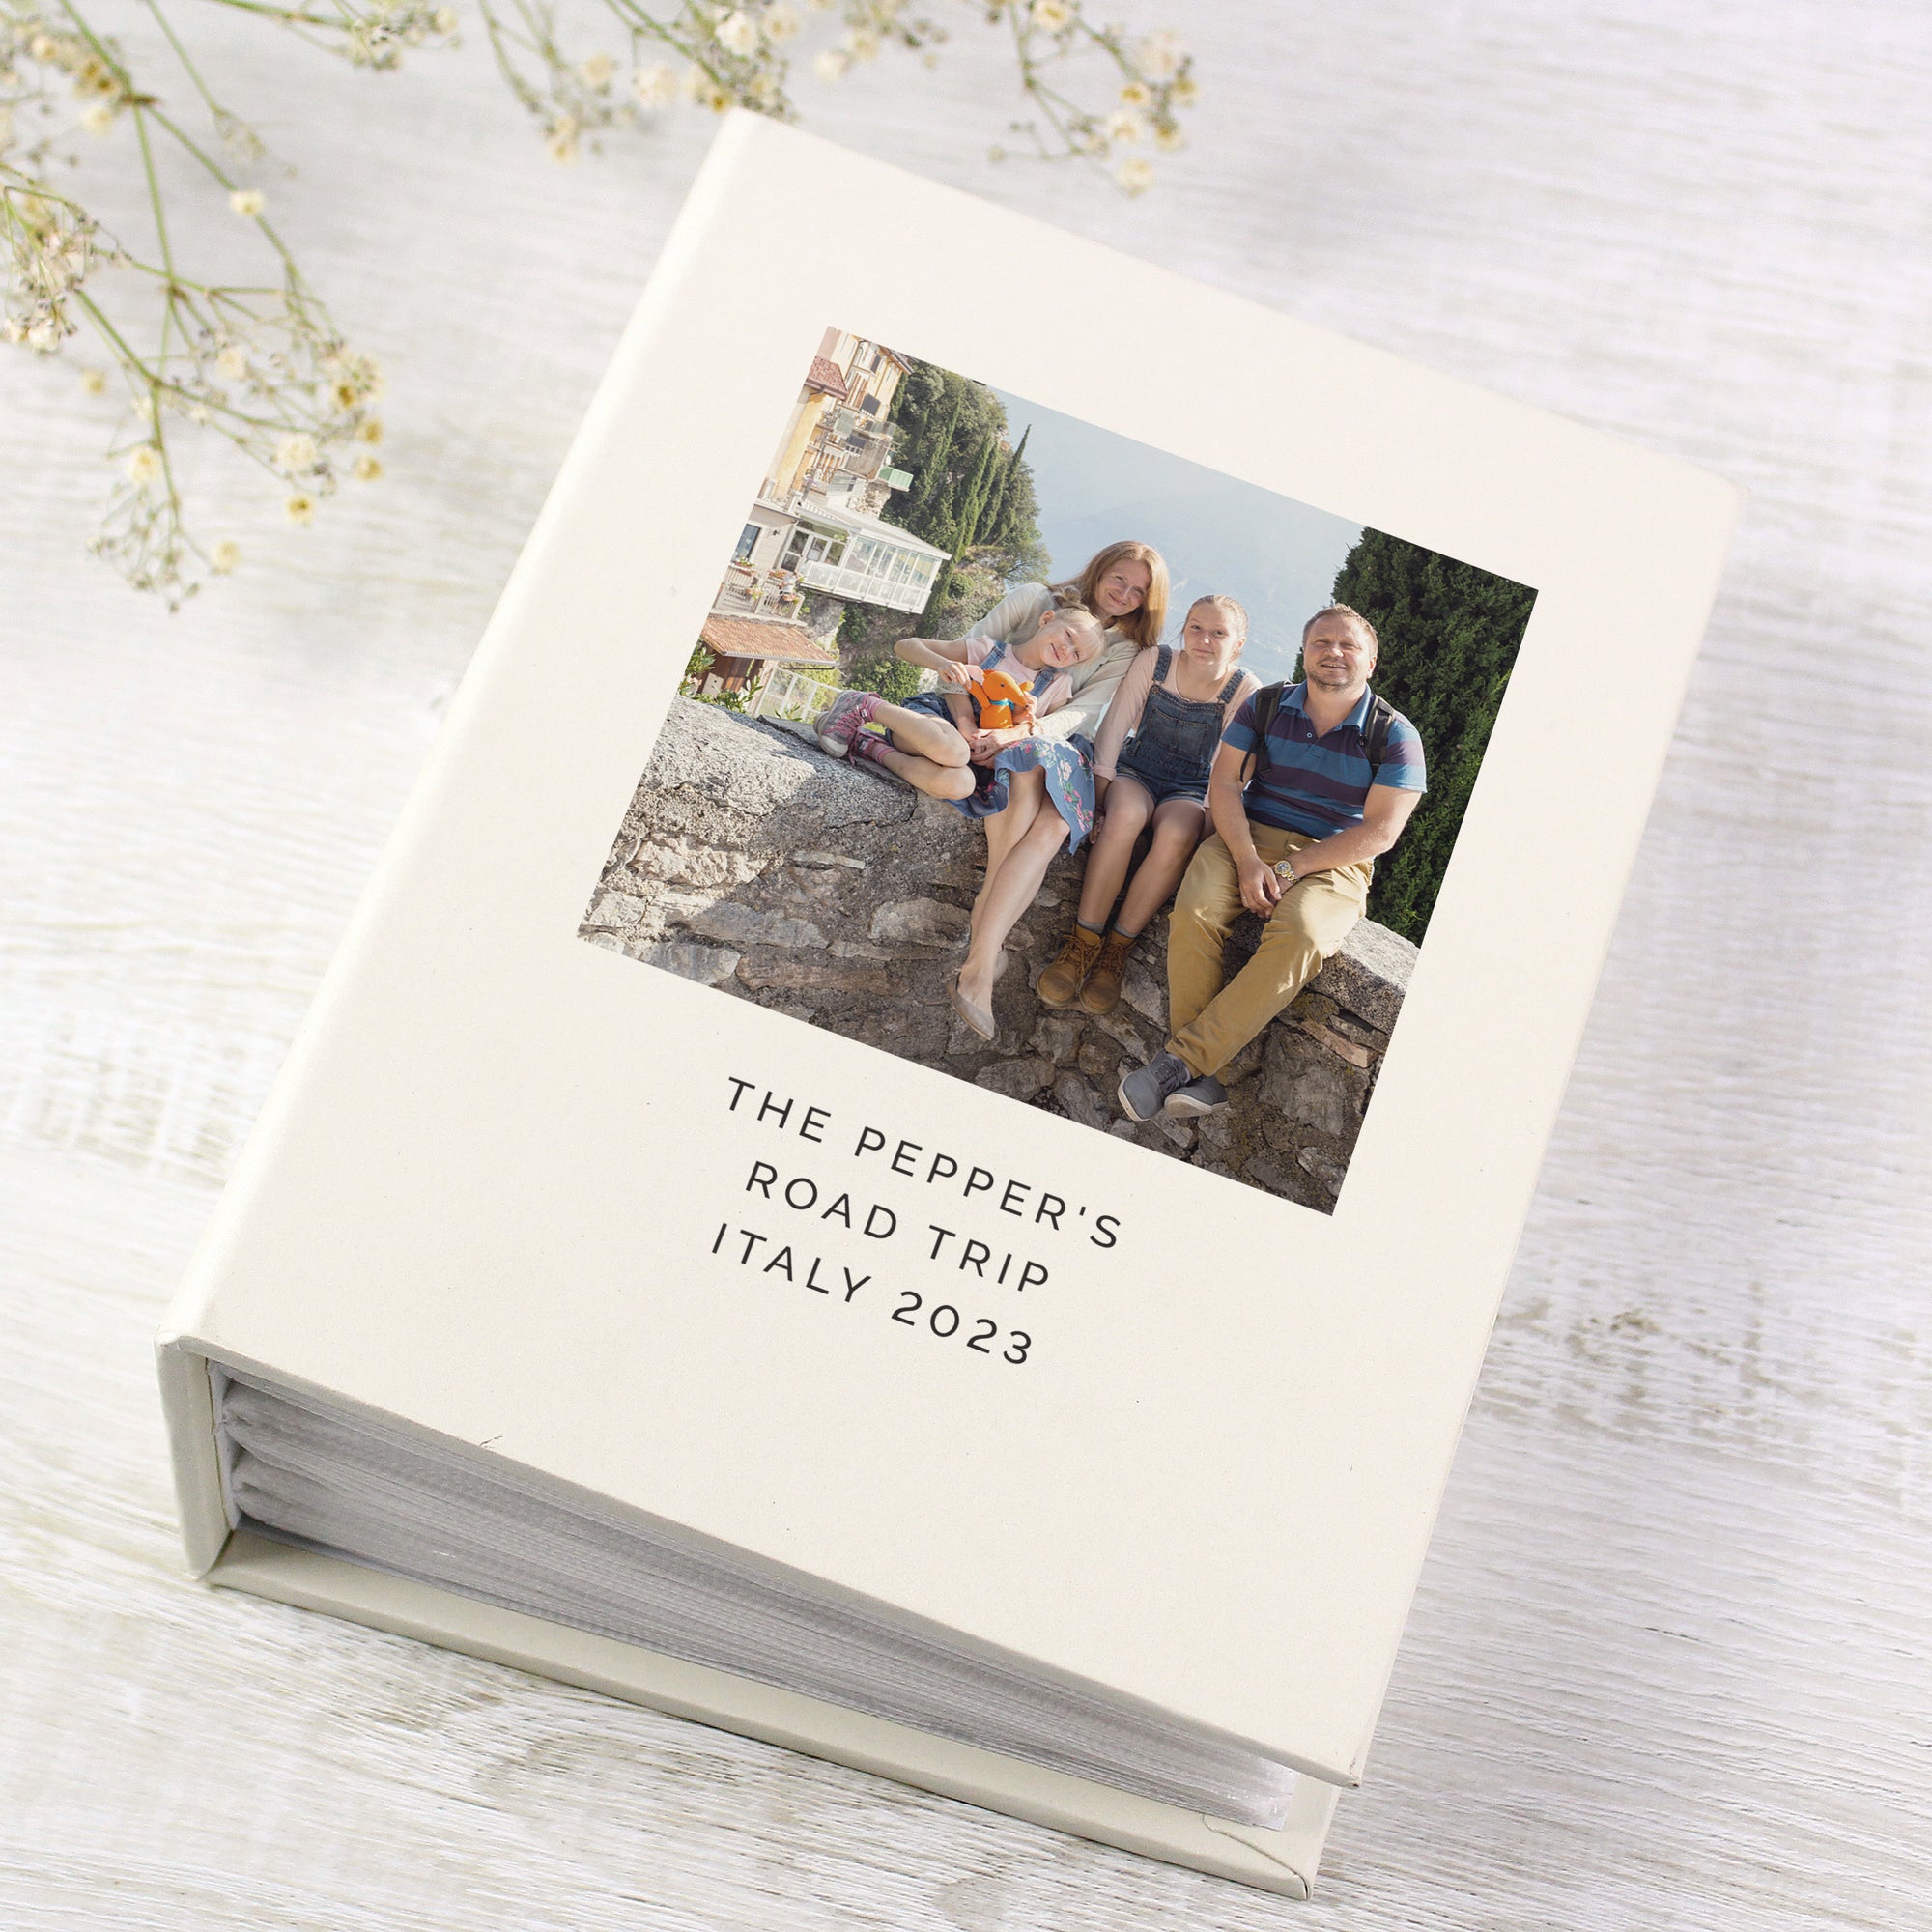 Image of a photo album where the front cover can be personalised with your own photo plus your own text over 3 lines of up to 20 characters per line which will be printed in uppercase. Internally the album can hold up to 100 6" by 4" photos.